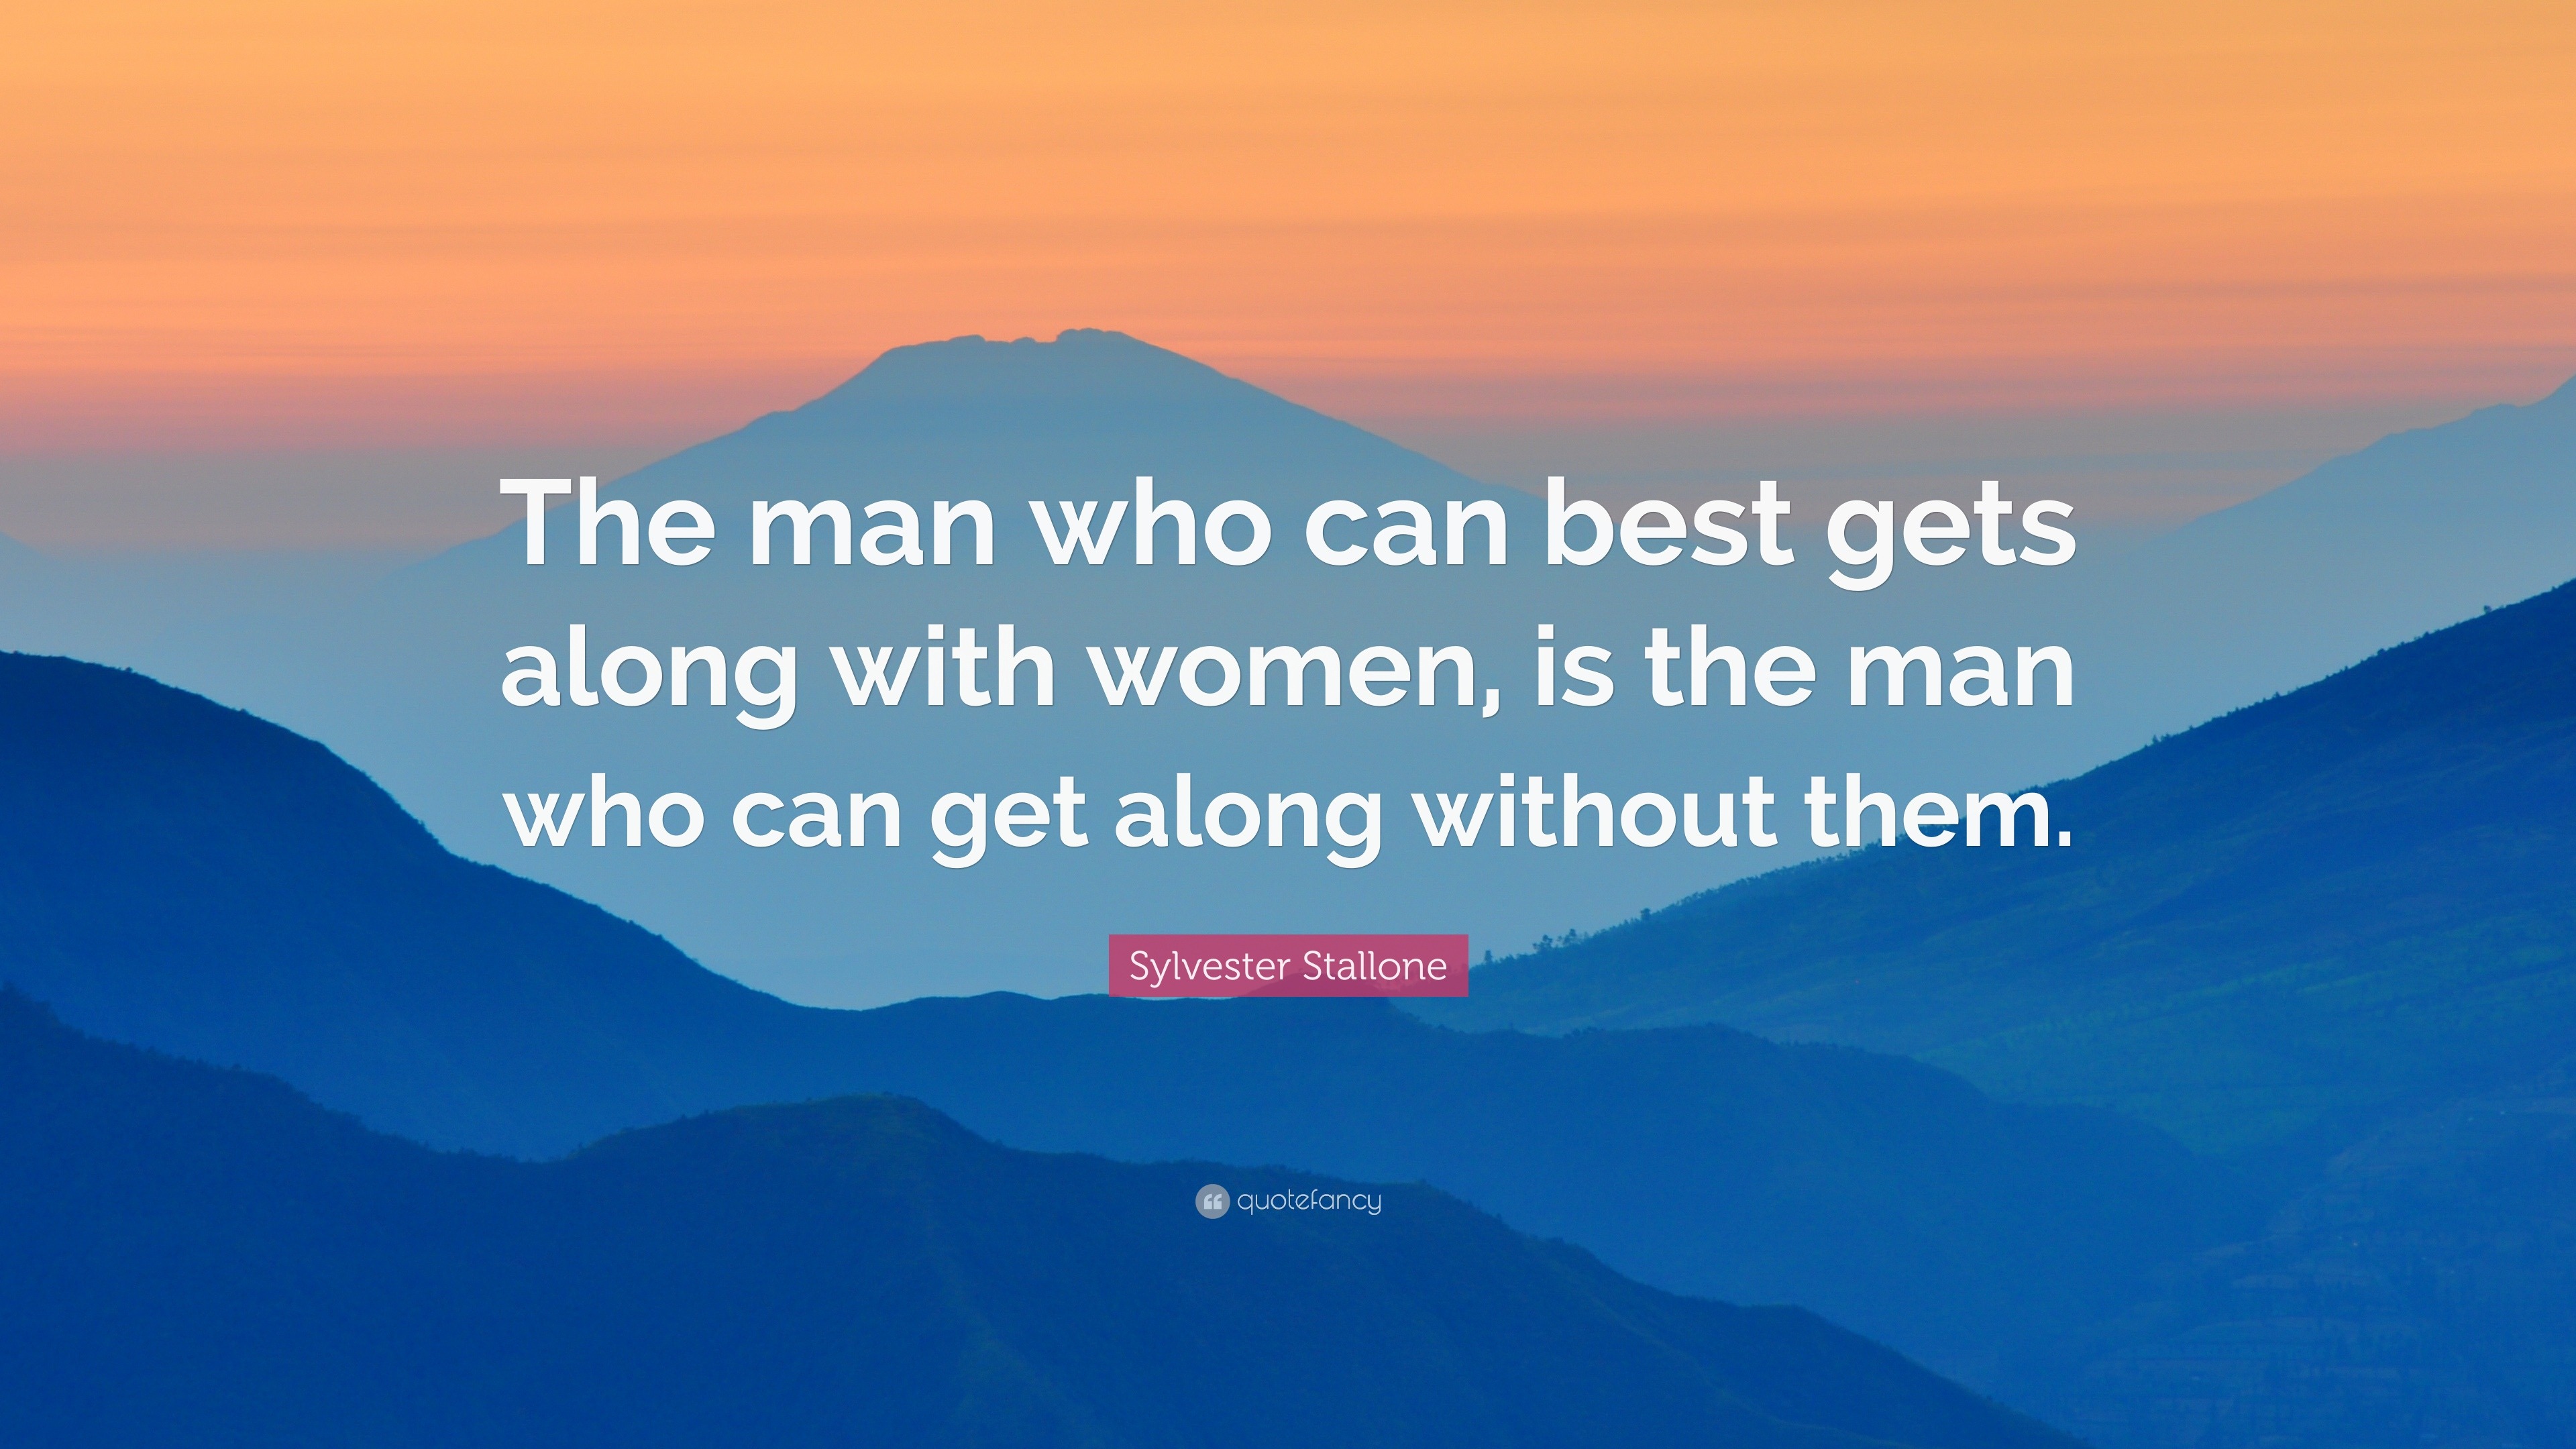 Sylvester Stallone Quote: “The man who can best gets along with women ...